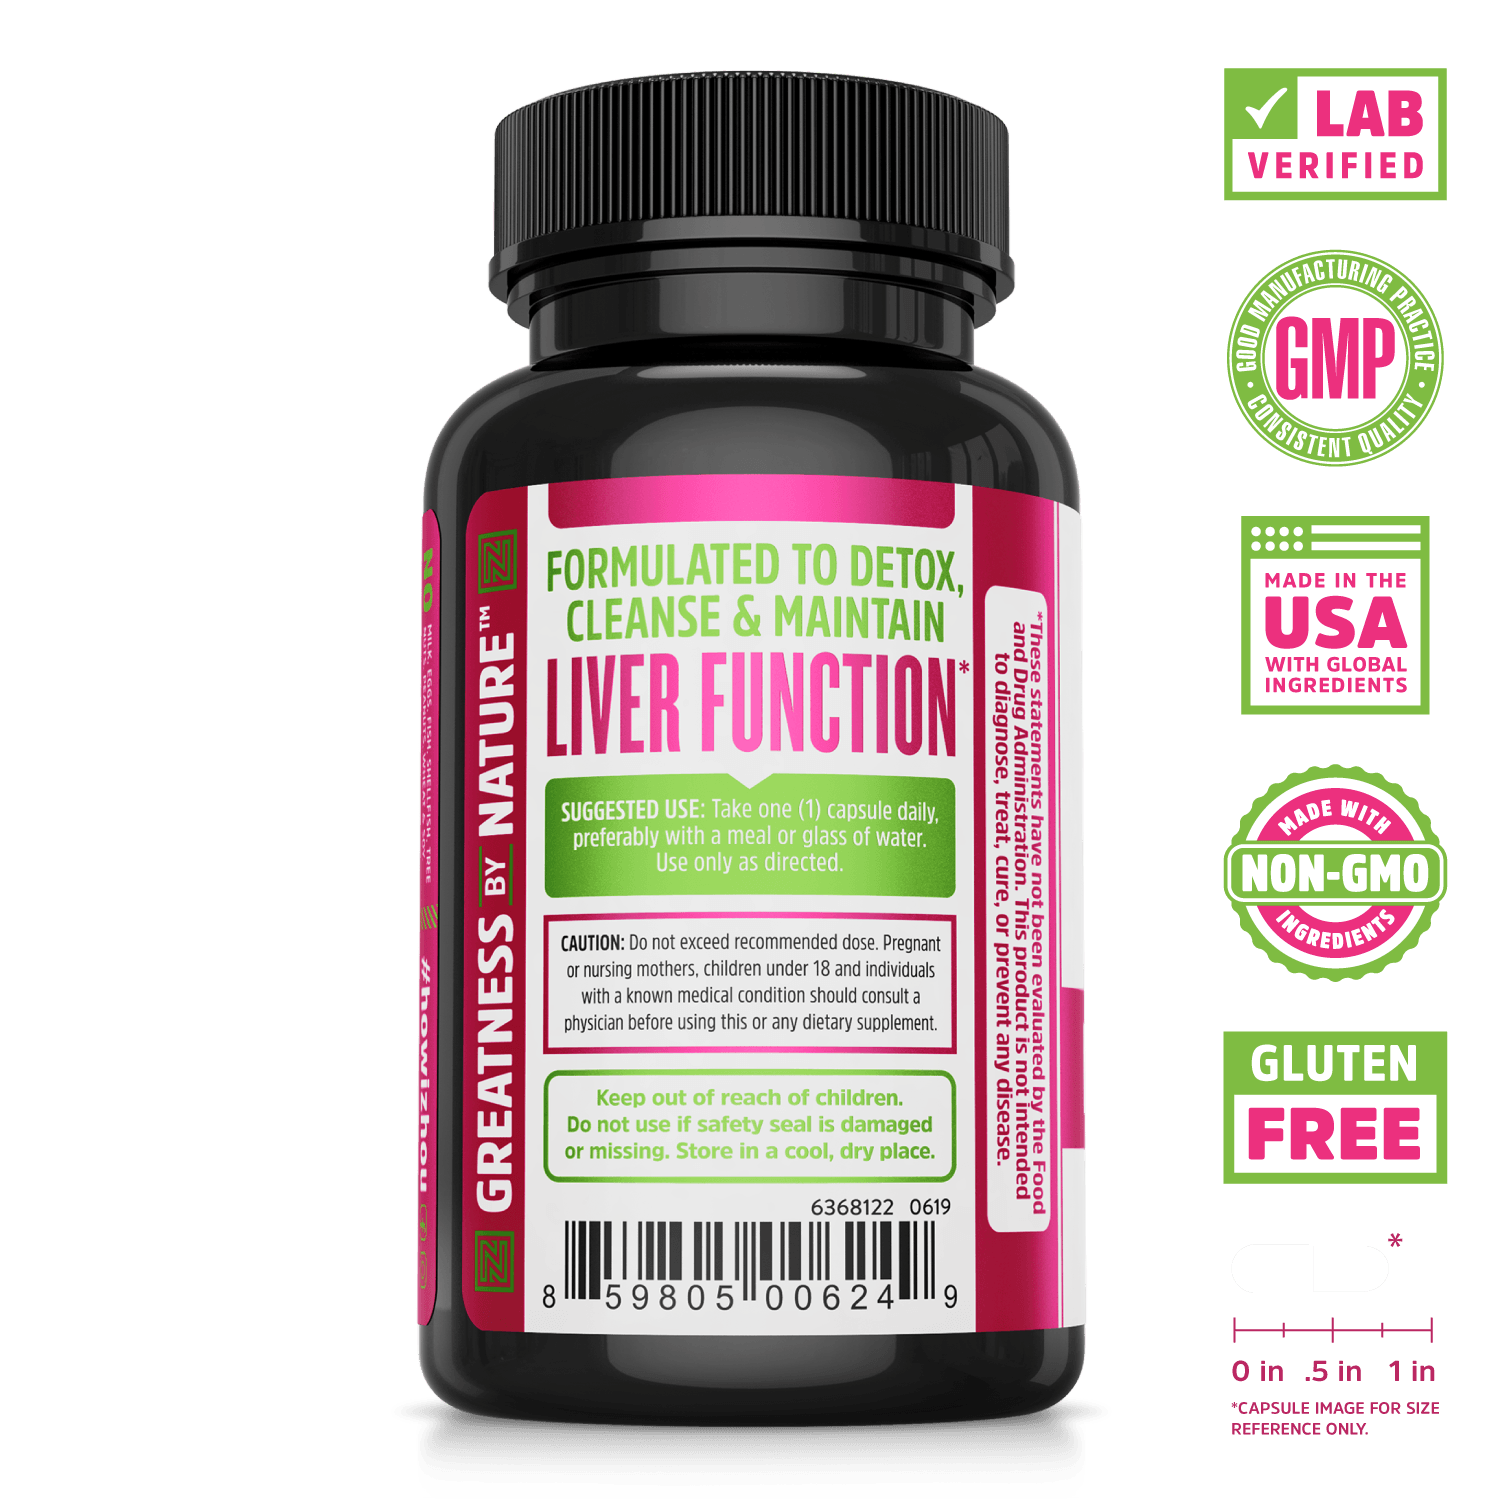 Liver function supplement Milk Thistle from Zhou Nutrition. Lab verified, good manufacturing practices, made in the USA with global ingredients, made with non-GMO ingredients, gluten free